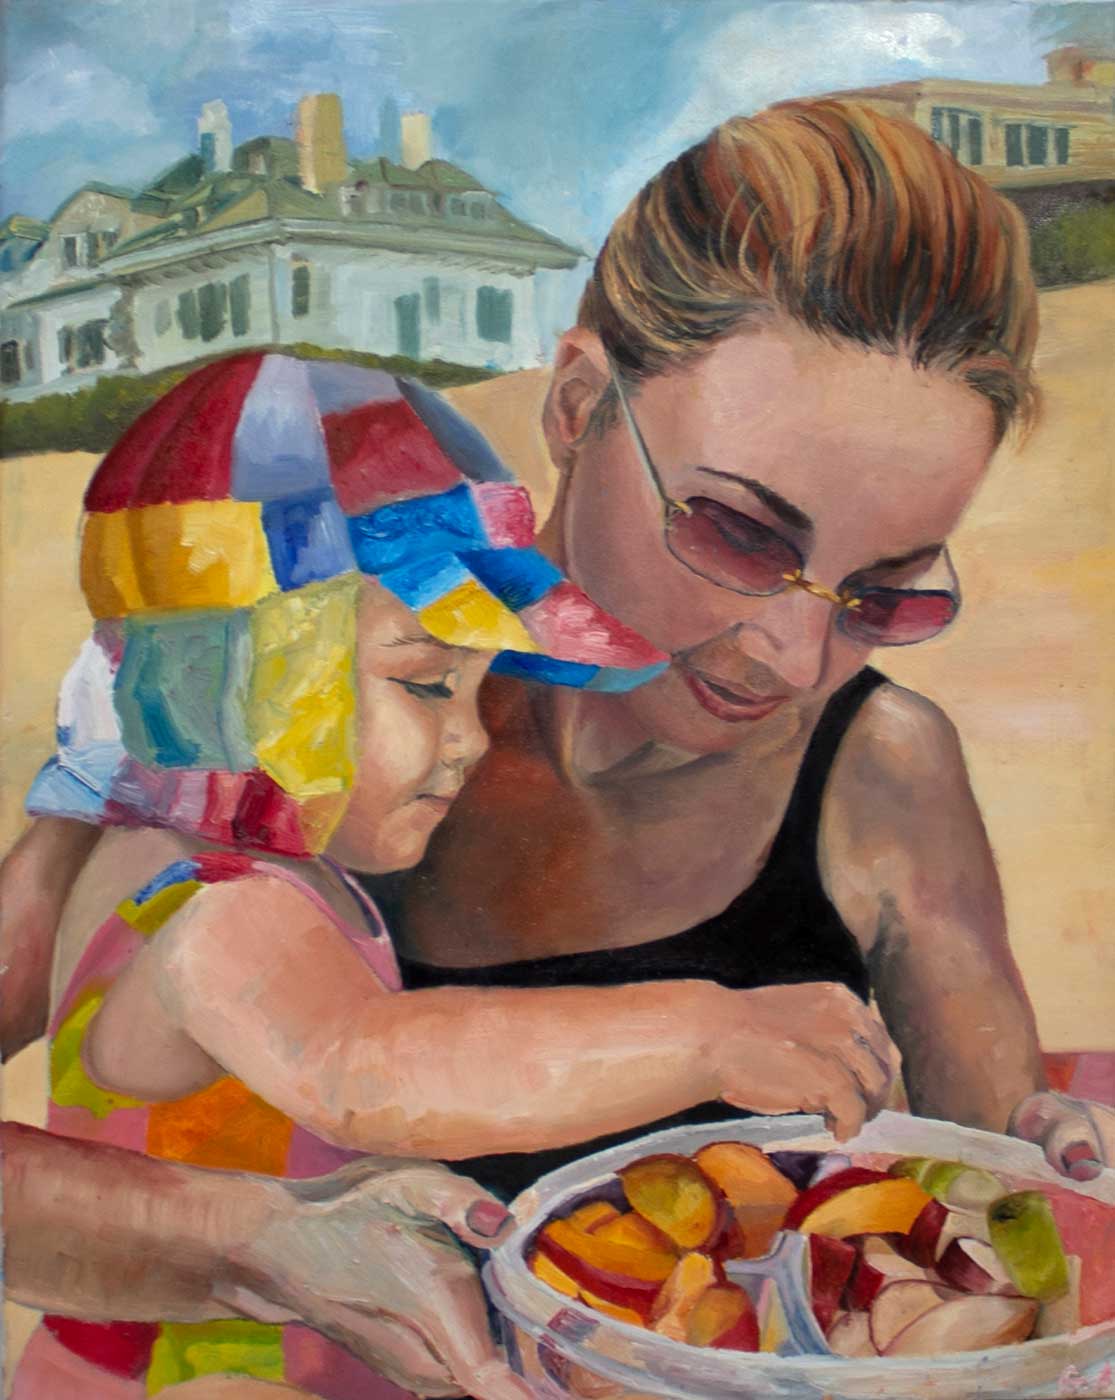 painting of a woman holding a plate and a child grabbing a slice of fruit.